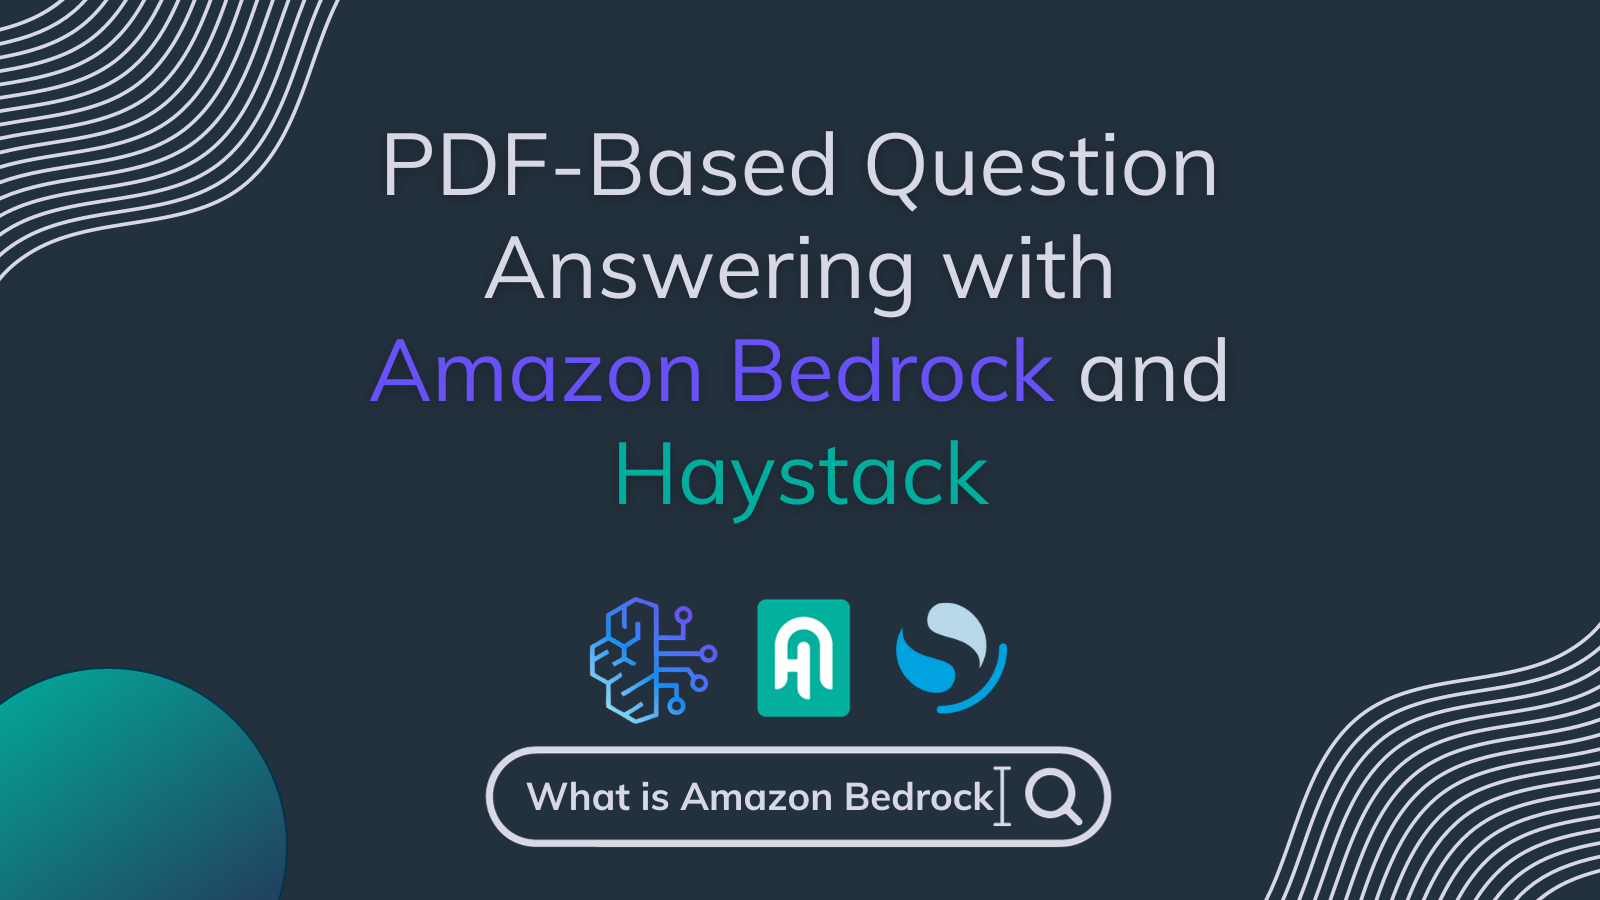 Thumbnail image with "PDF-Based Question Answering with Amazon Bedrock and Haystack" text and Amazon Bedrock, Haystack, OpenSearch logos on top of a input box that writes "What is Amazon Bedrock"